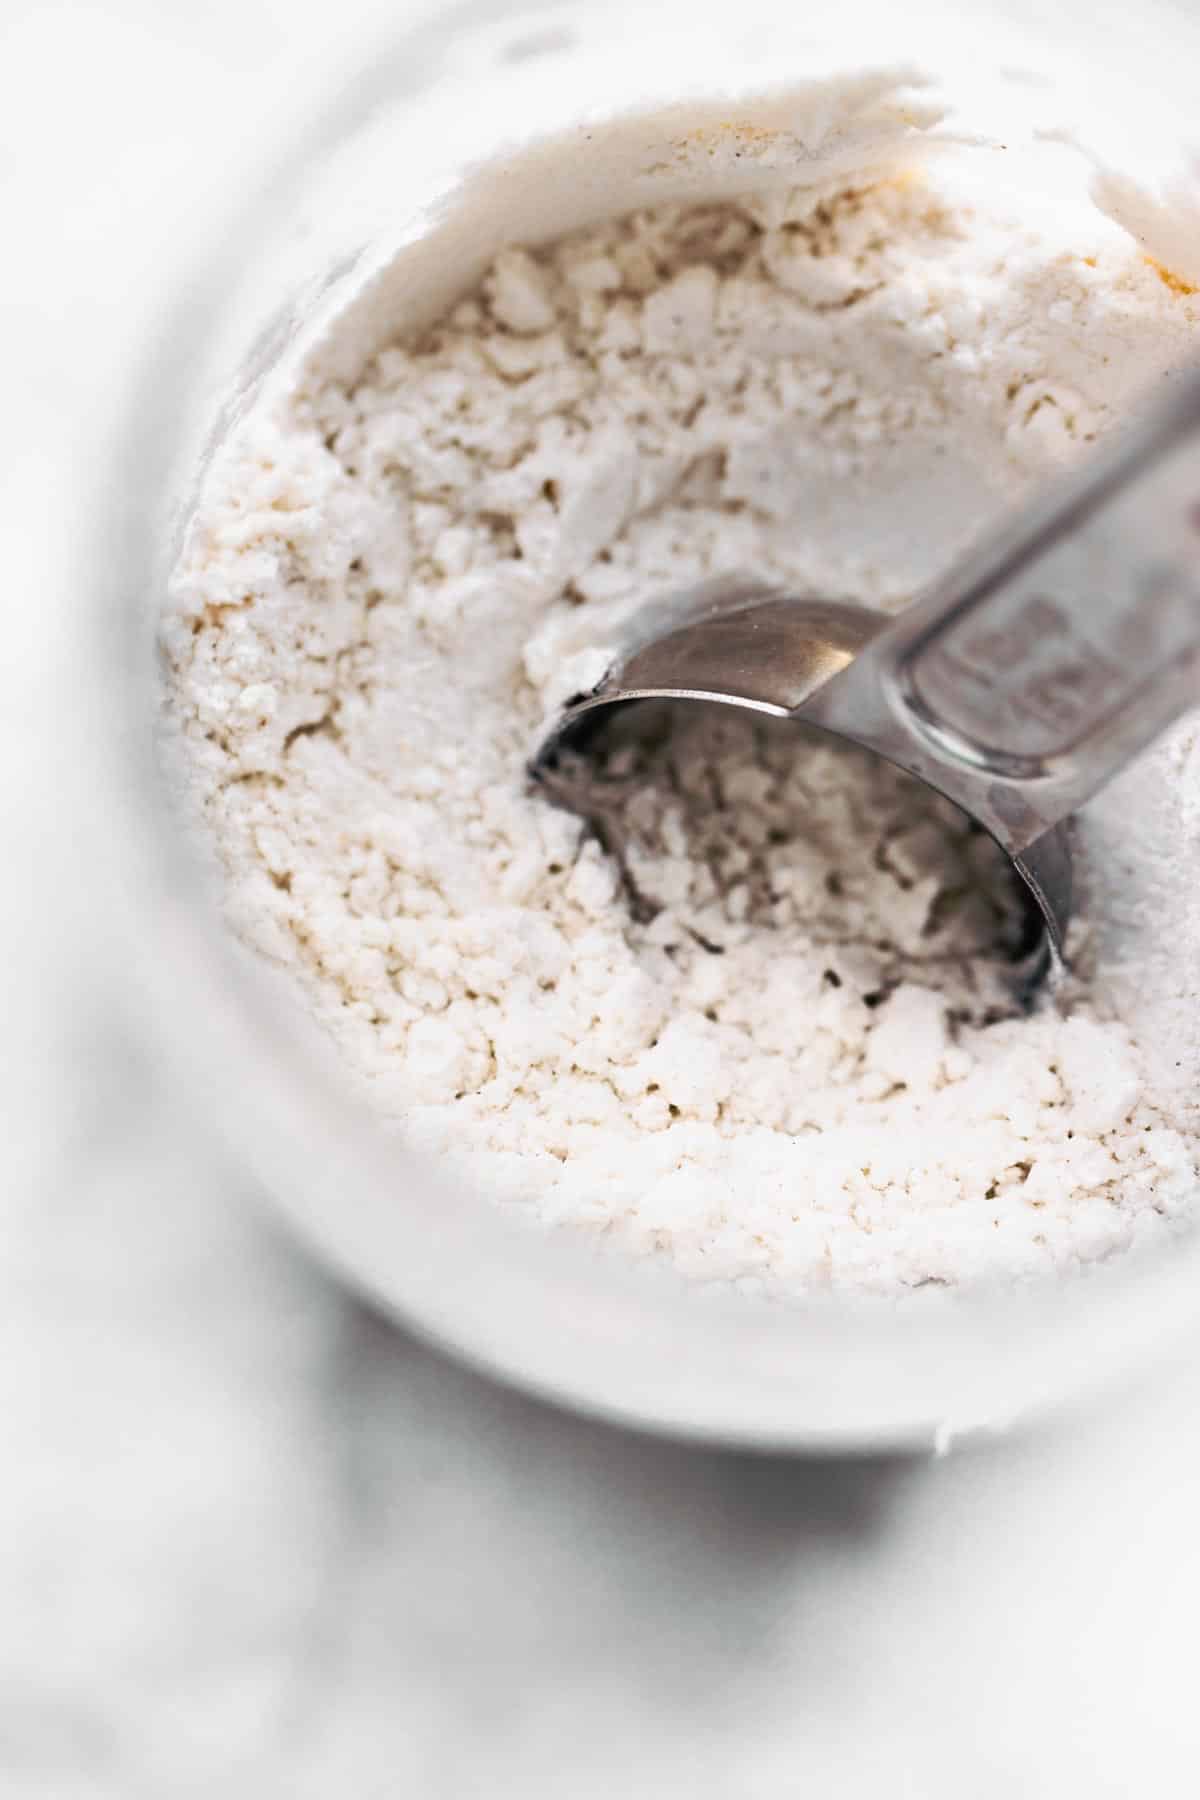 A measuring spoon dipped into a jar of gluten free flour blend.